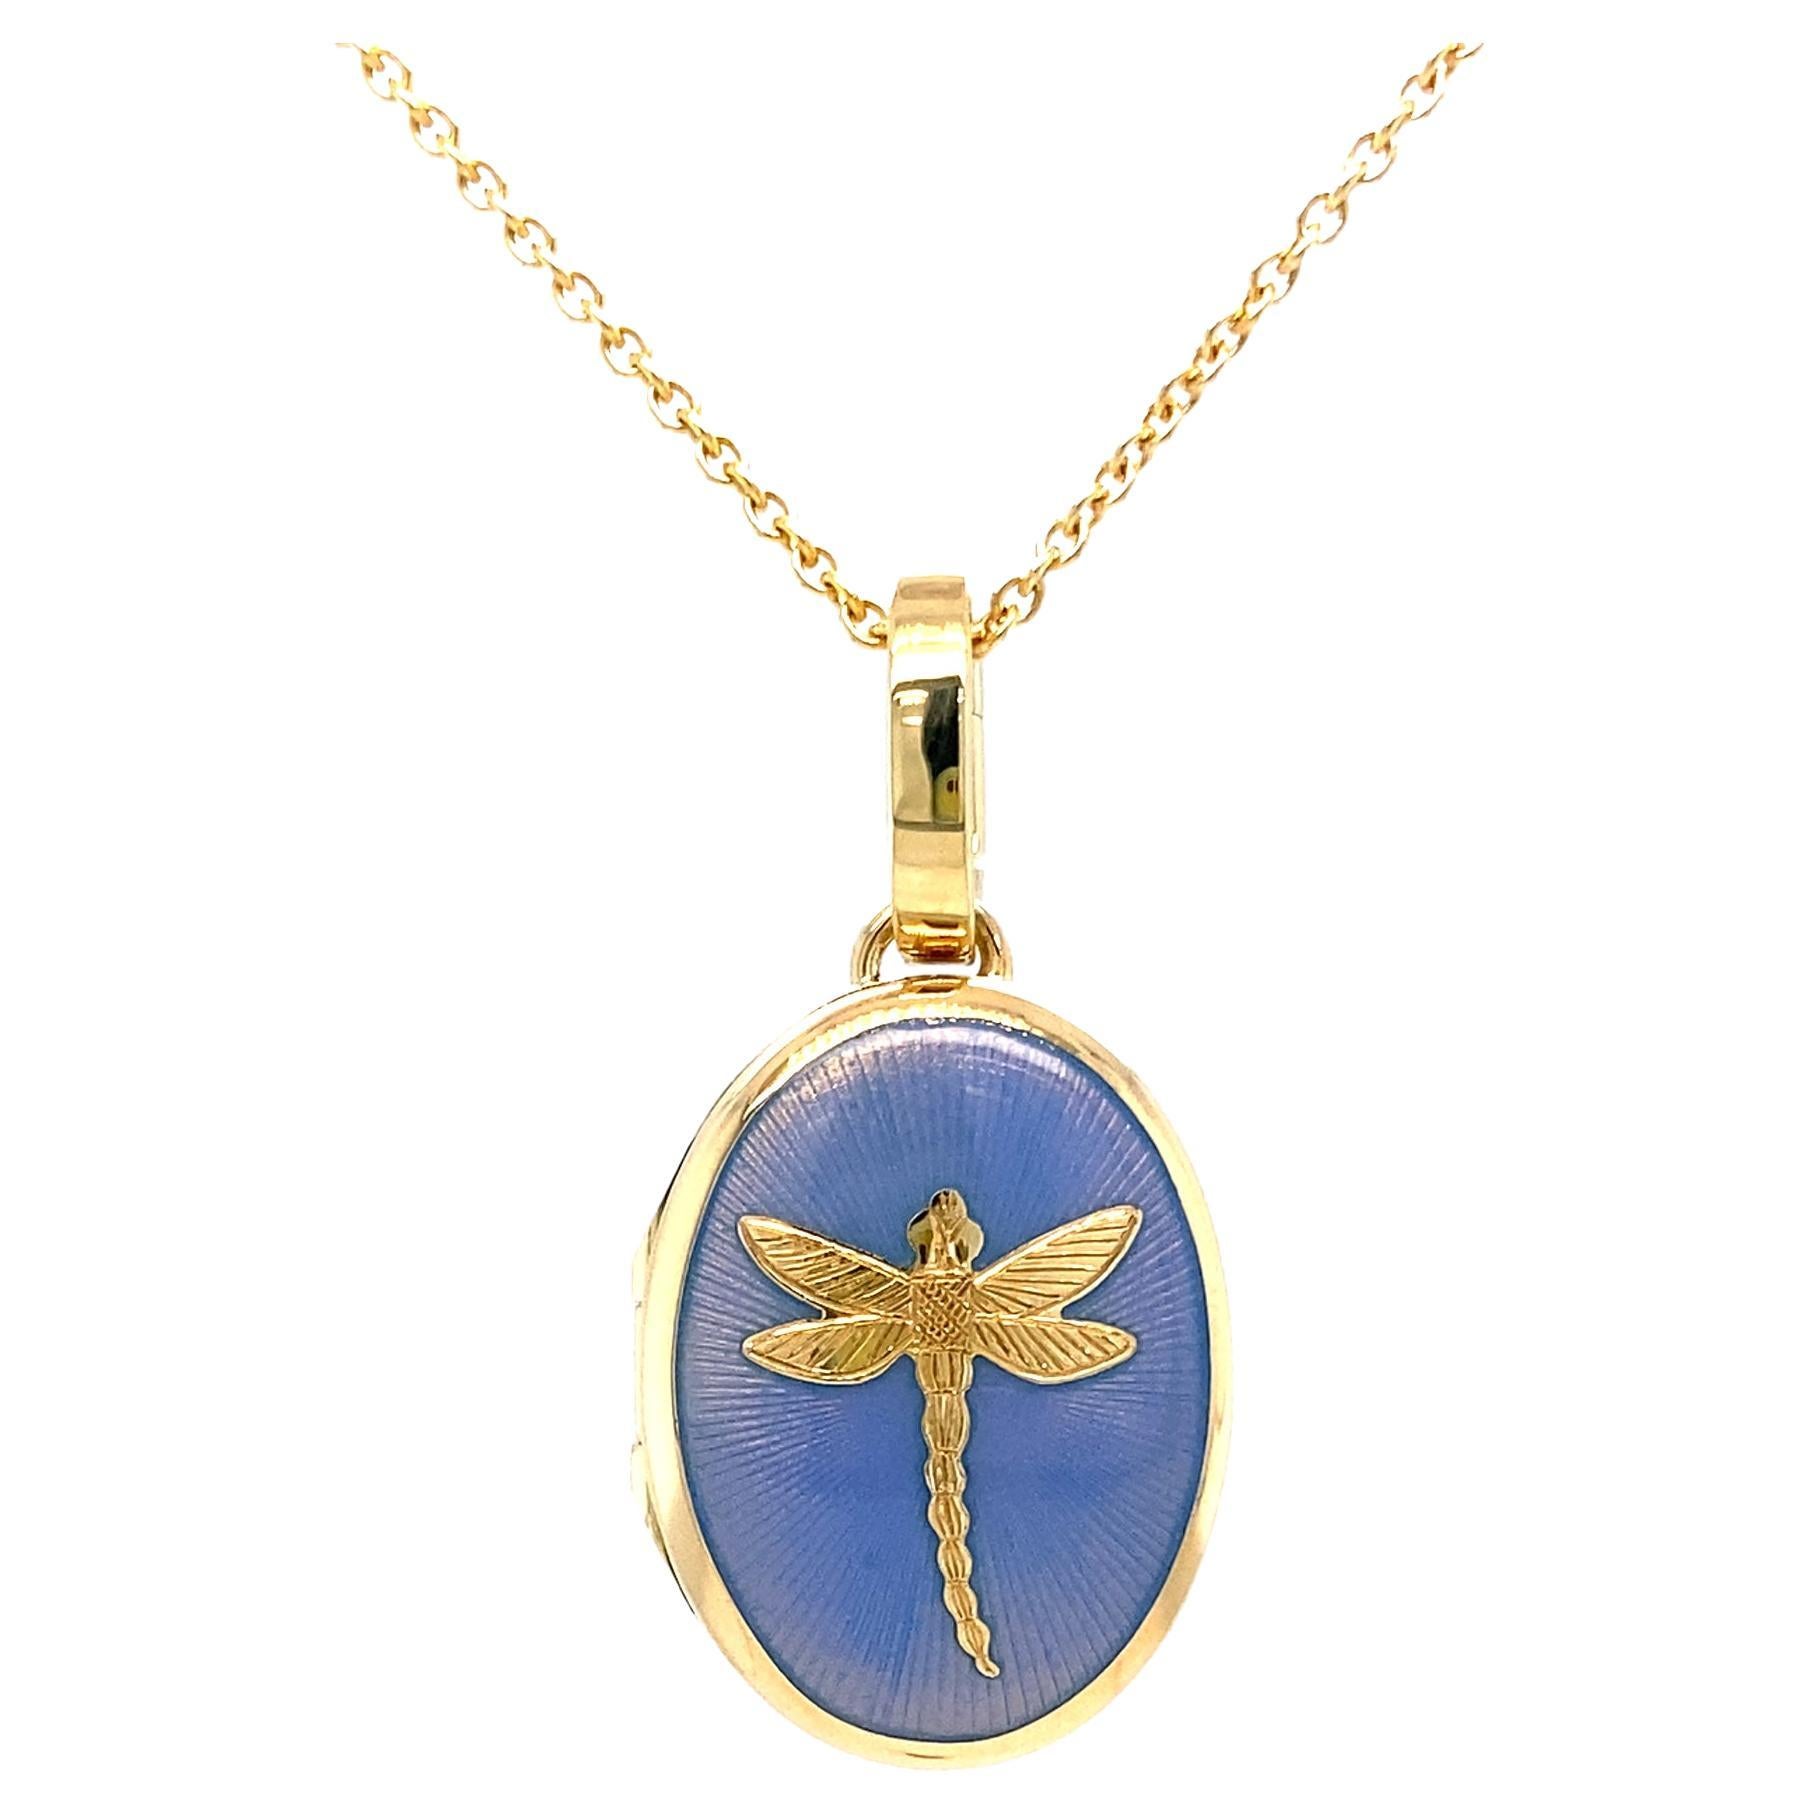 Oval Locket Pendant Necklace Dragonfly 18k Yellow Gold - Opalescent Blue Enamel For Sale